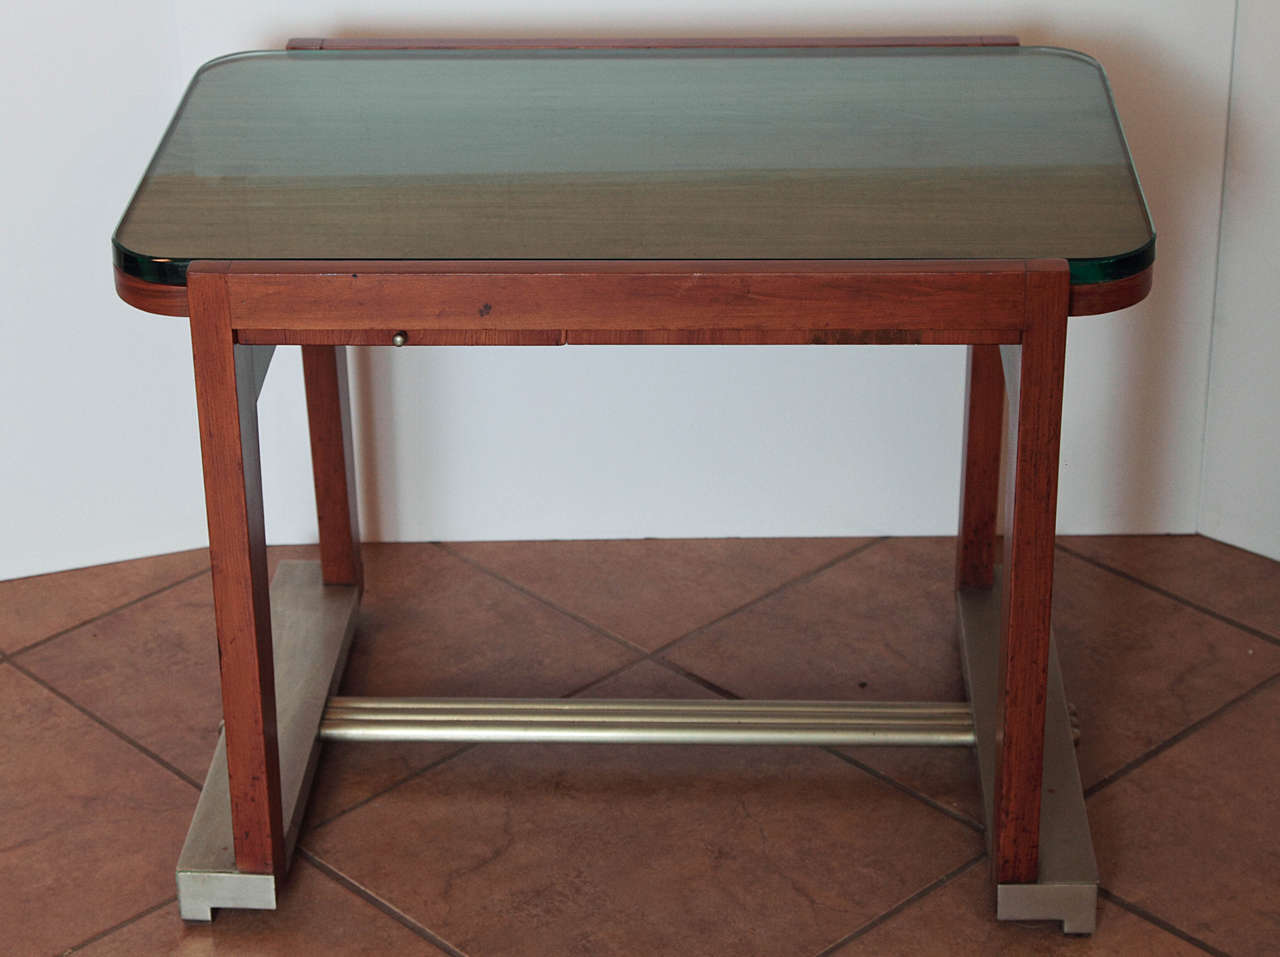 Likely a 1930s-1940s French design.
Sycamore, or the like, with brushed-plate base and stretchers, massive beveled glass top and vitrolite-lined sliding drawer.
Glass top and wooden frame canted so that glass is secured, but removable for cleaning